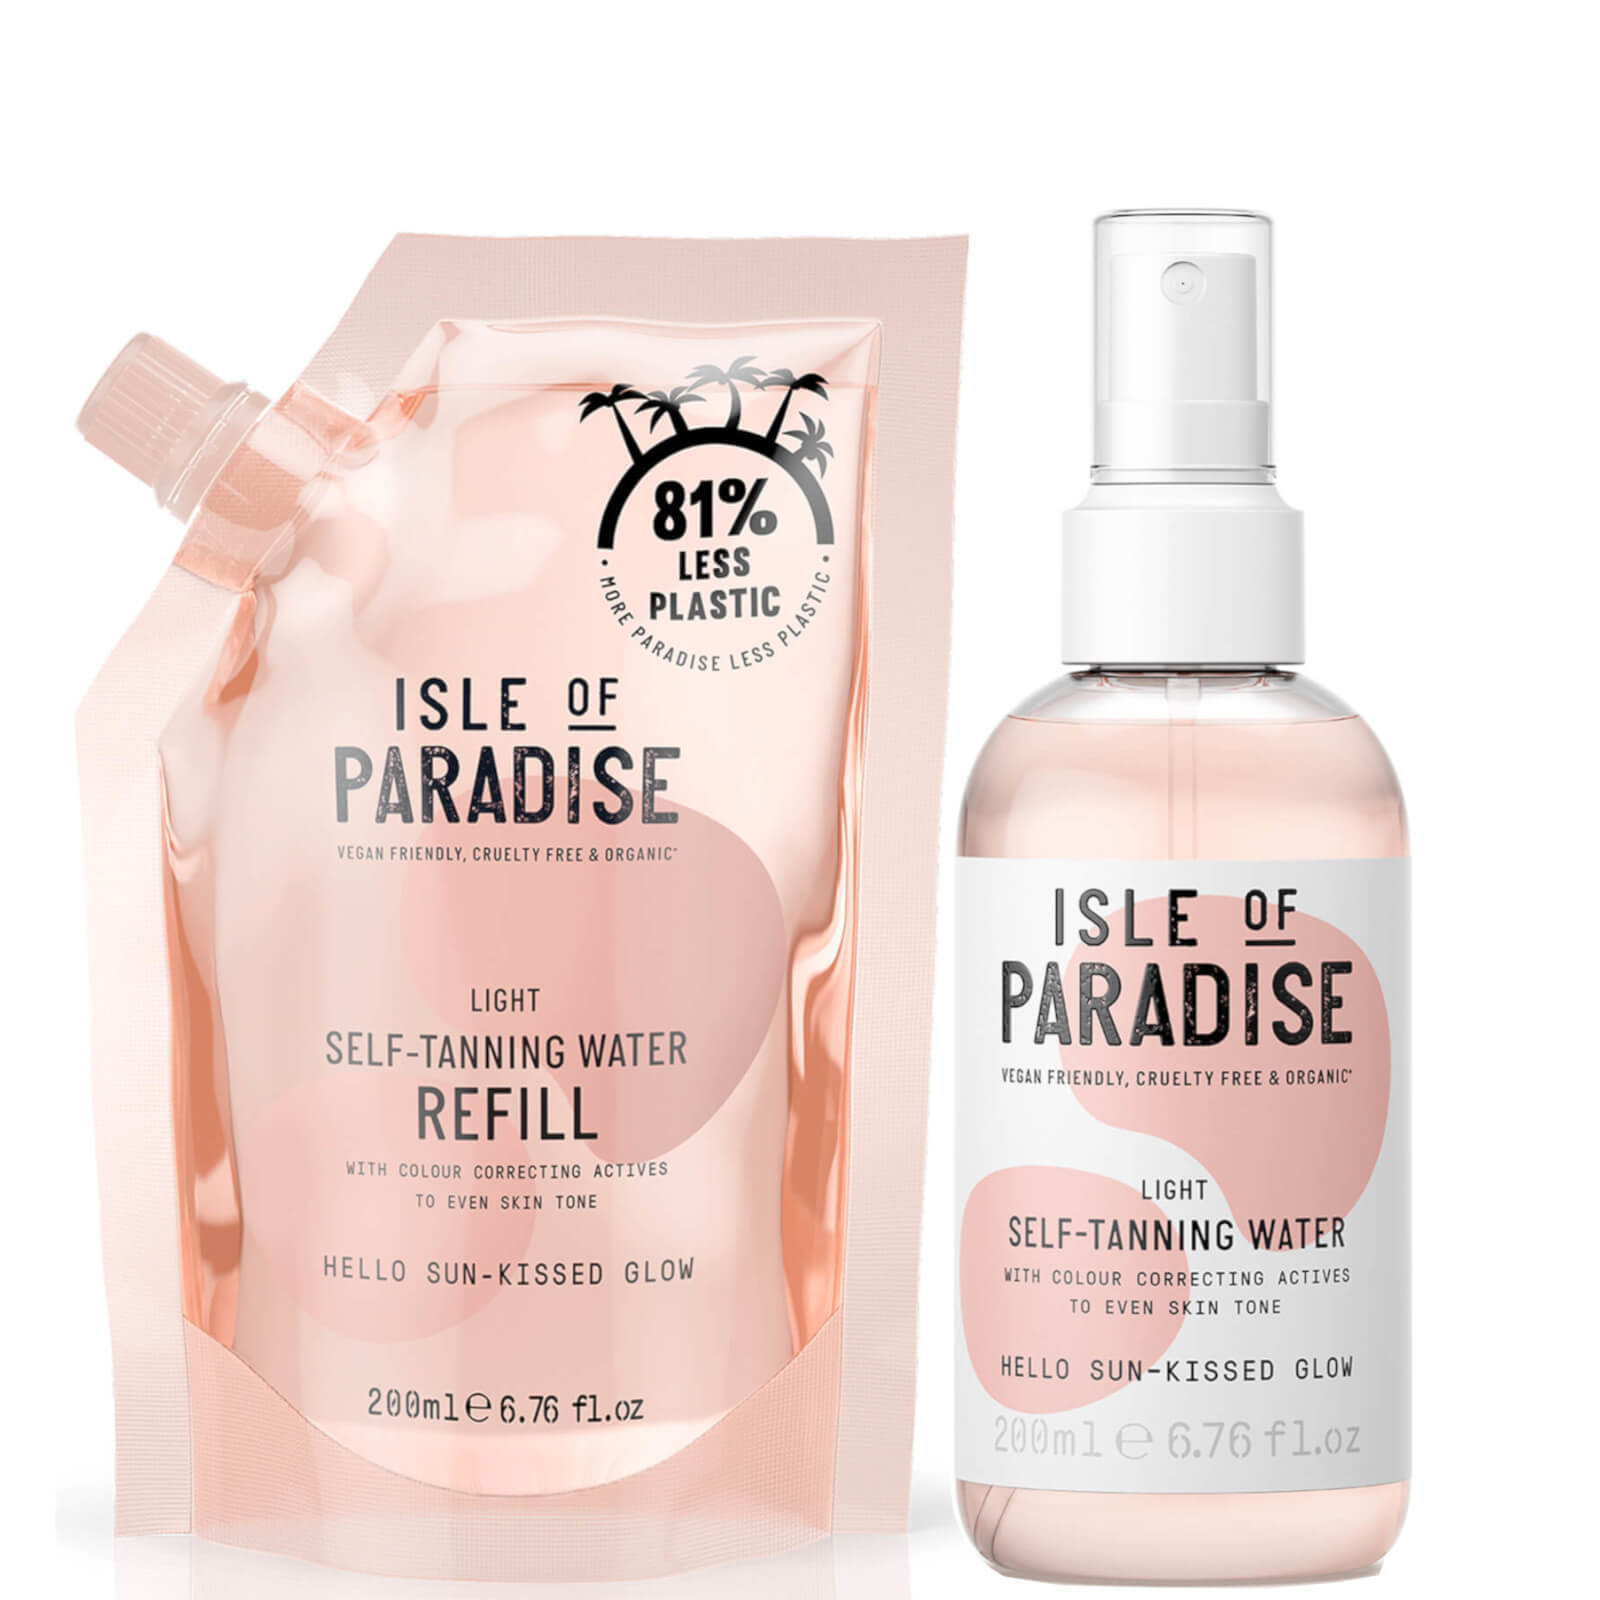 Isle of Paradise Light Self-Tanning Water and Refill Bundle (Worth £33.9)